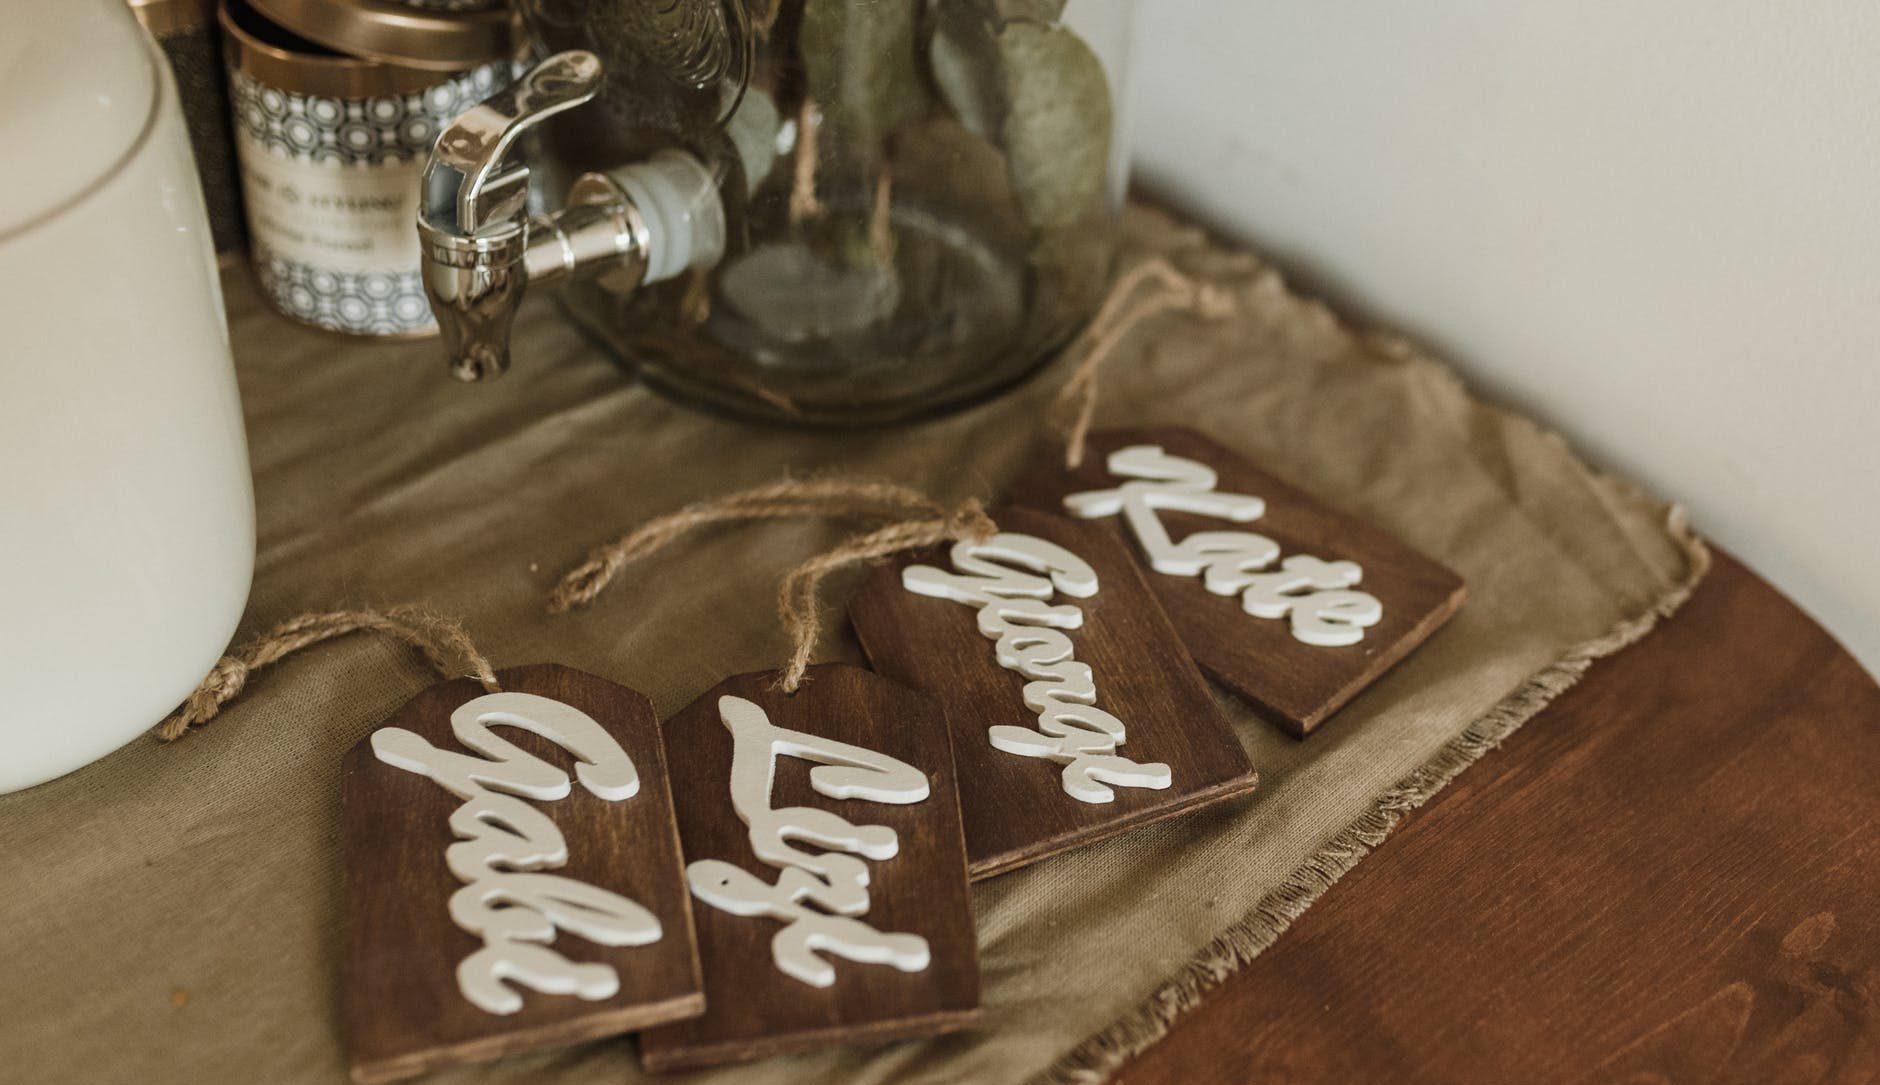 wooden name tags on the brown fabric